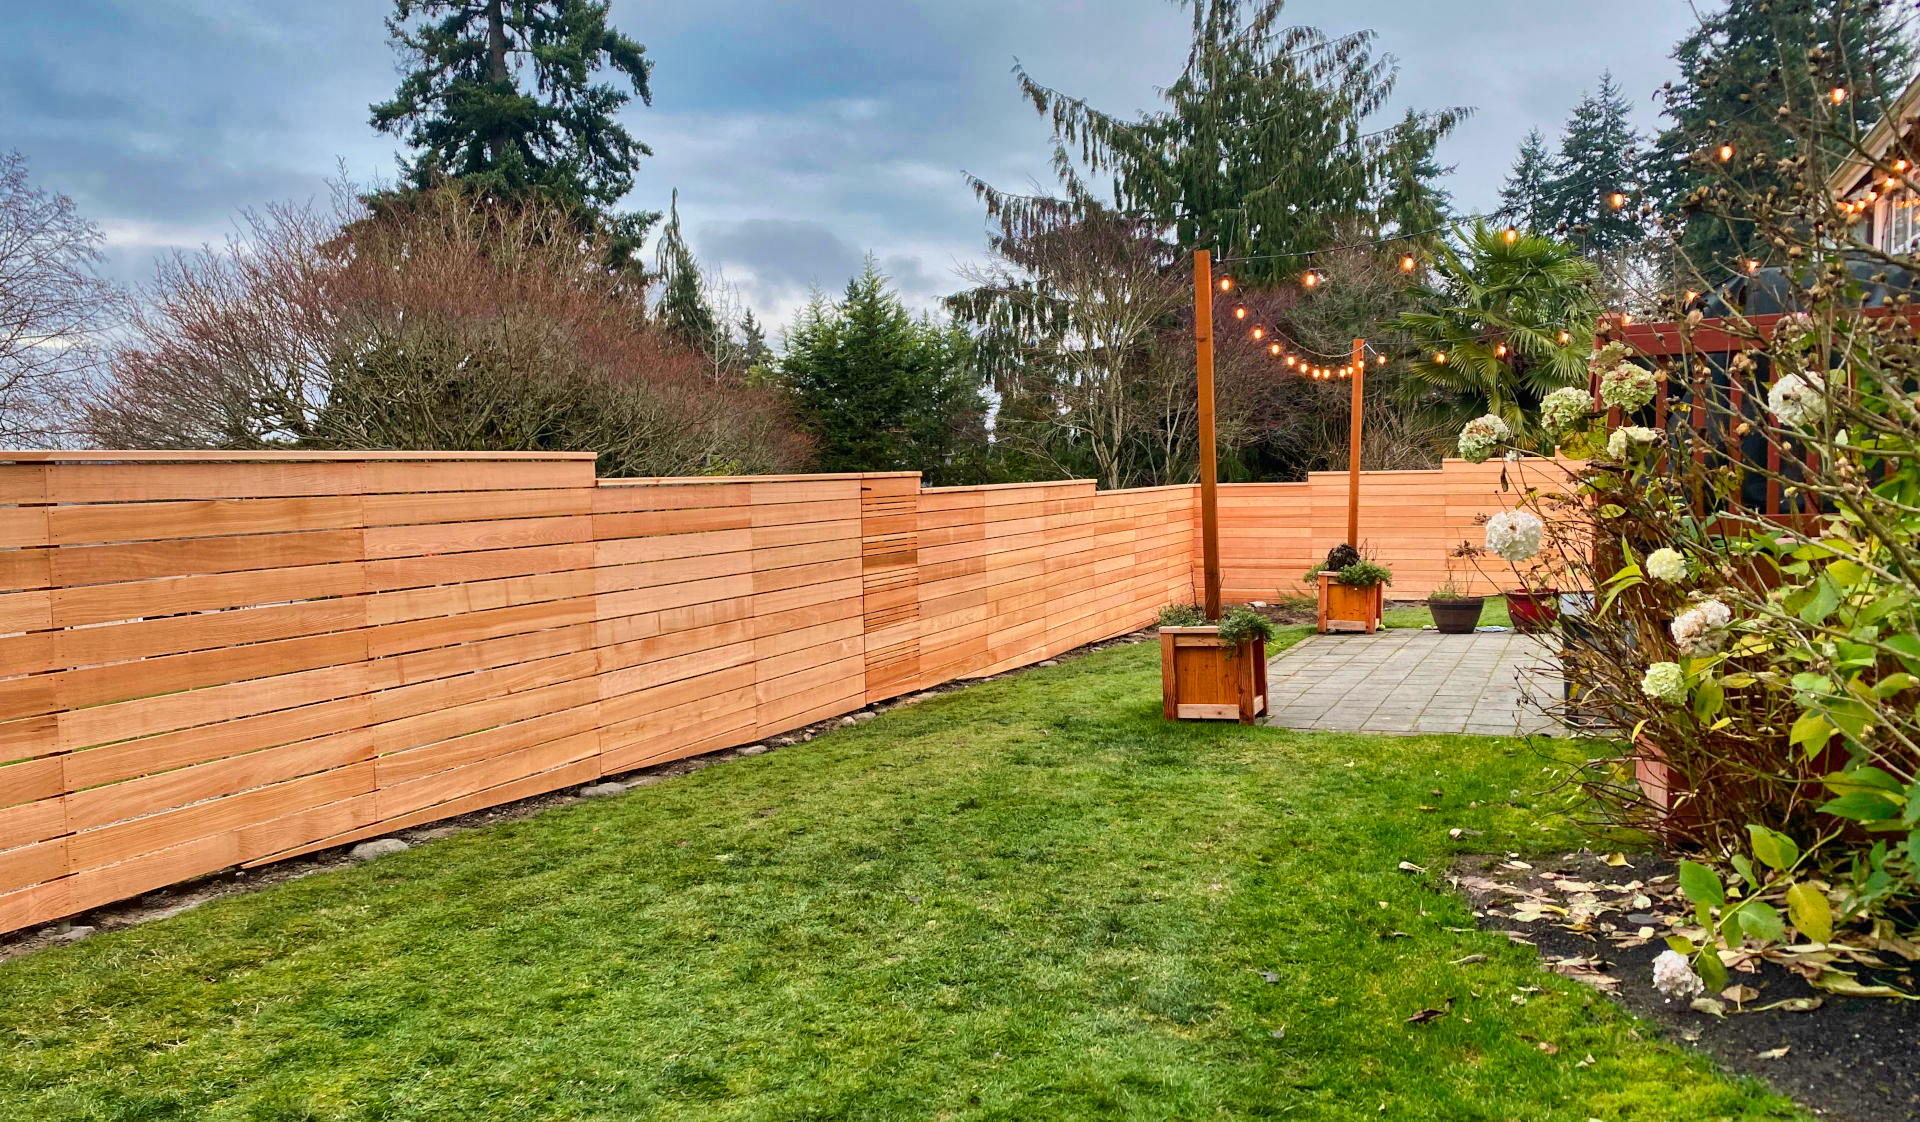 Cedar wood fence in Seattle yard with patio and decorative lights